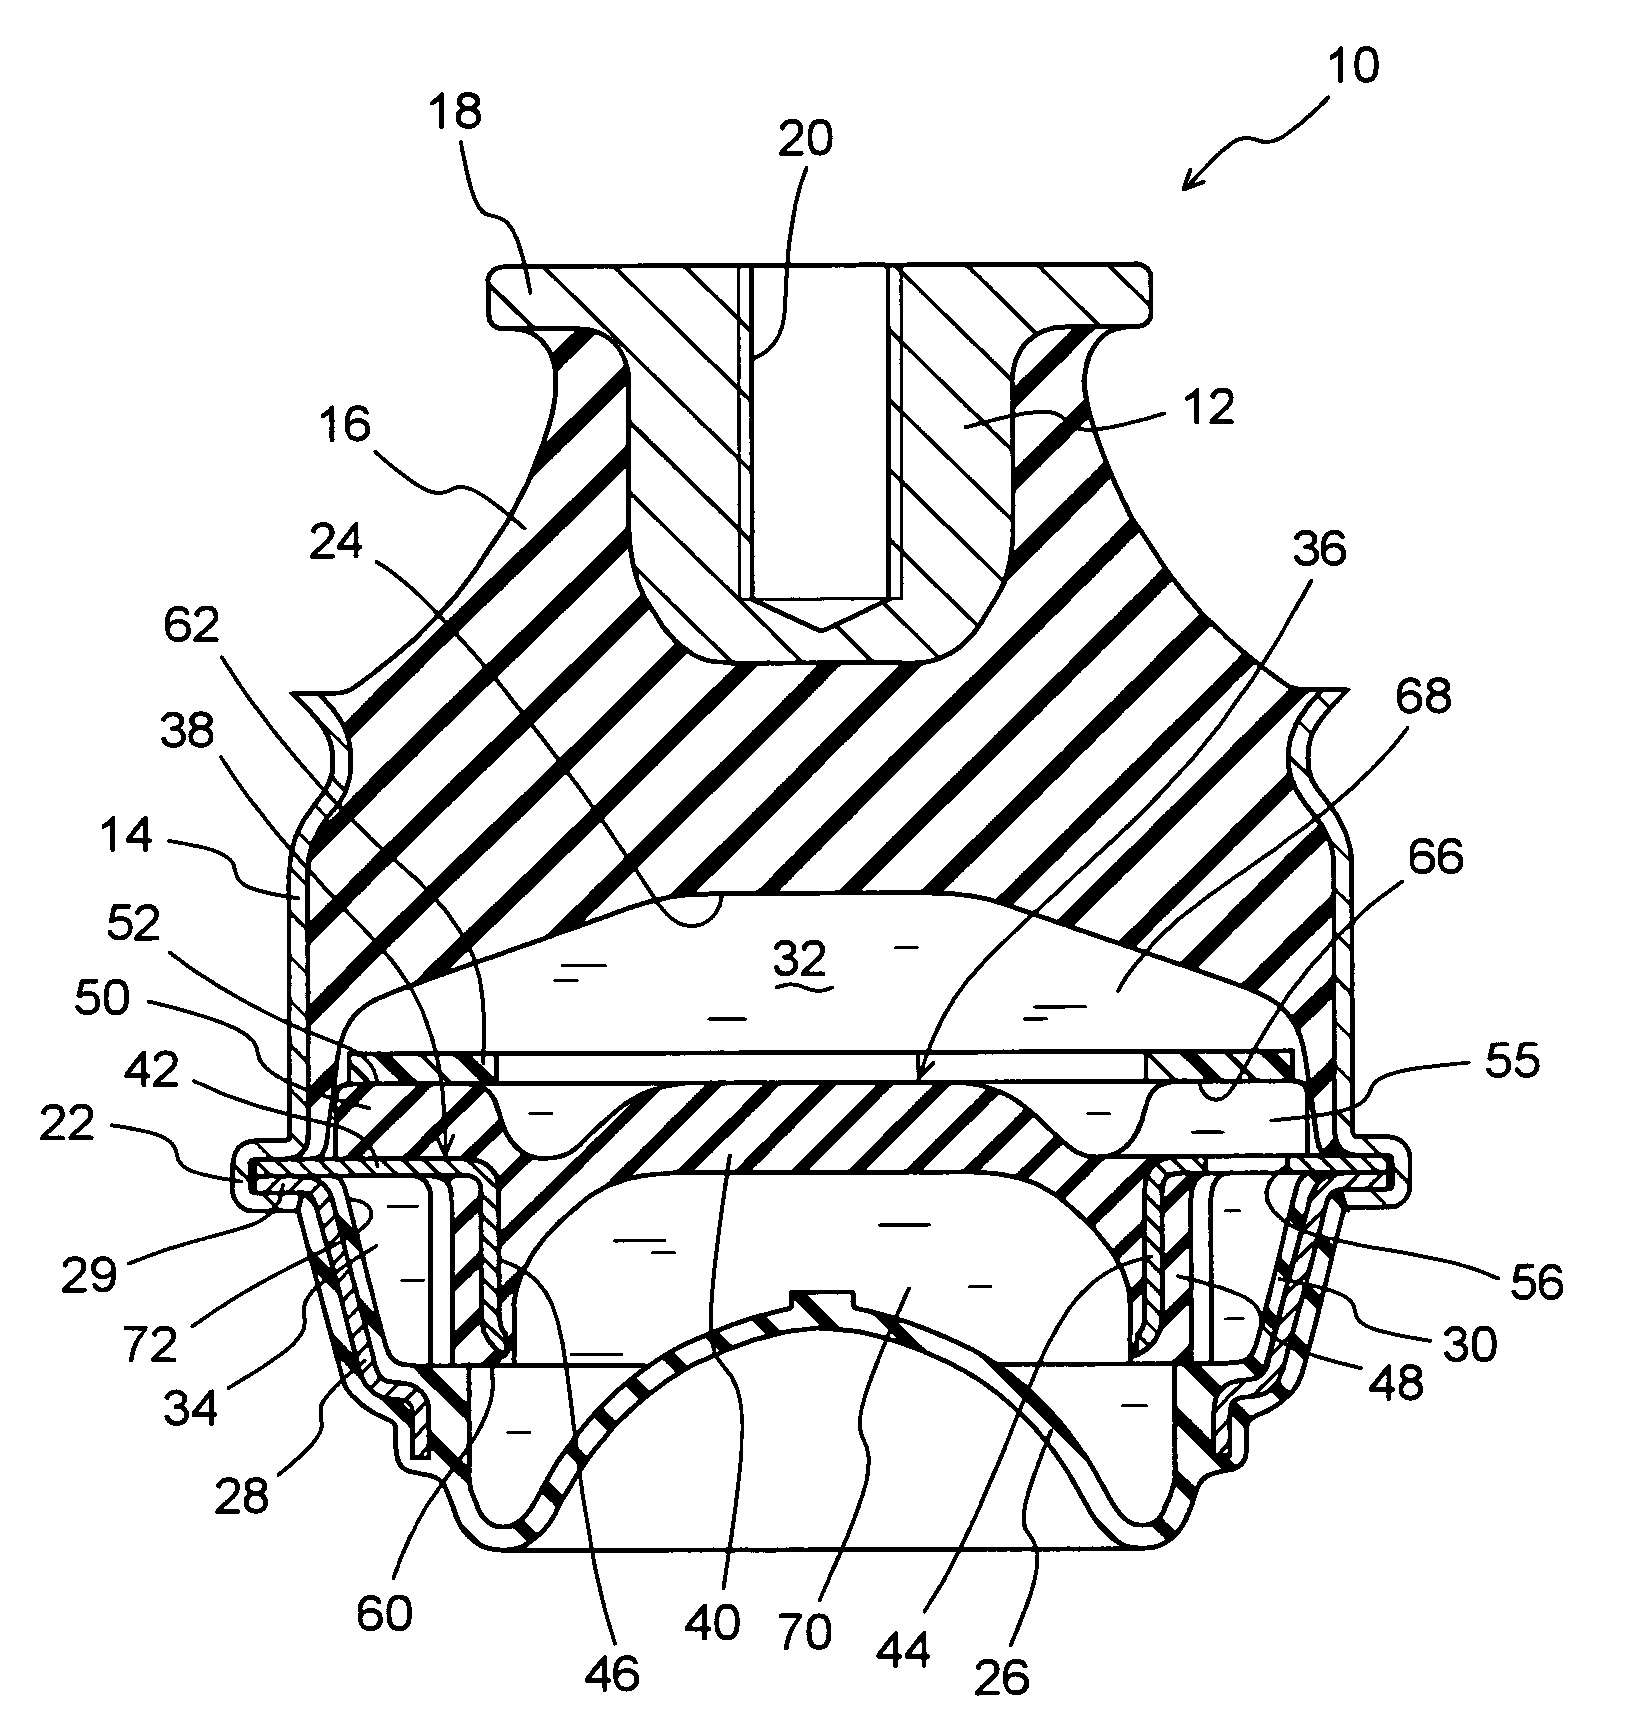 Fluid-filled vibration damping device